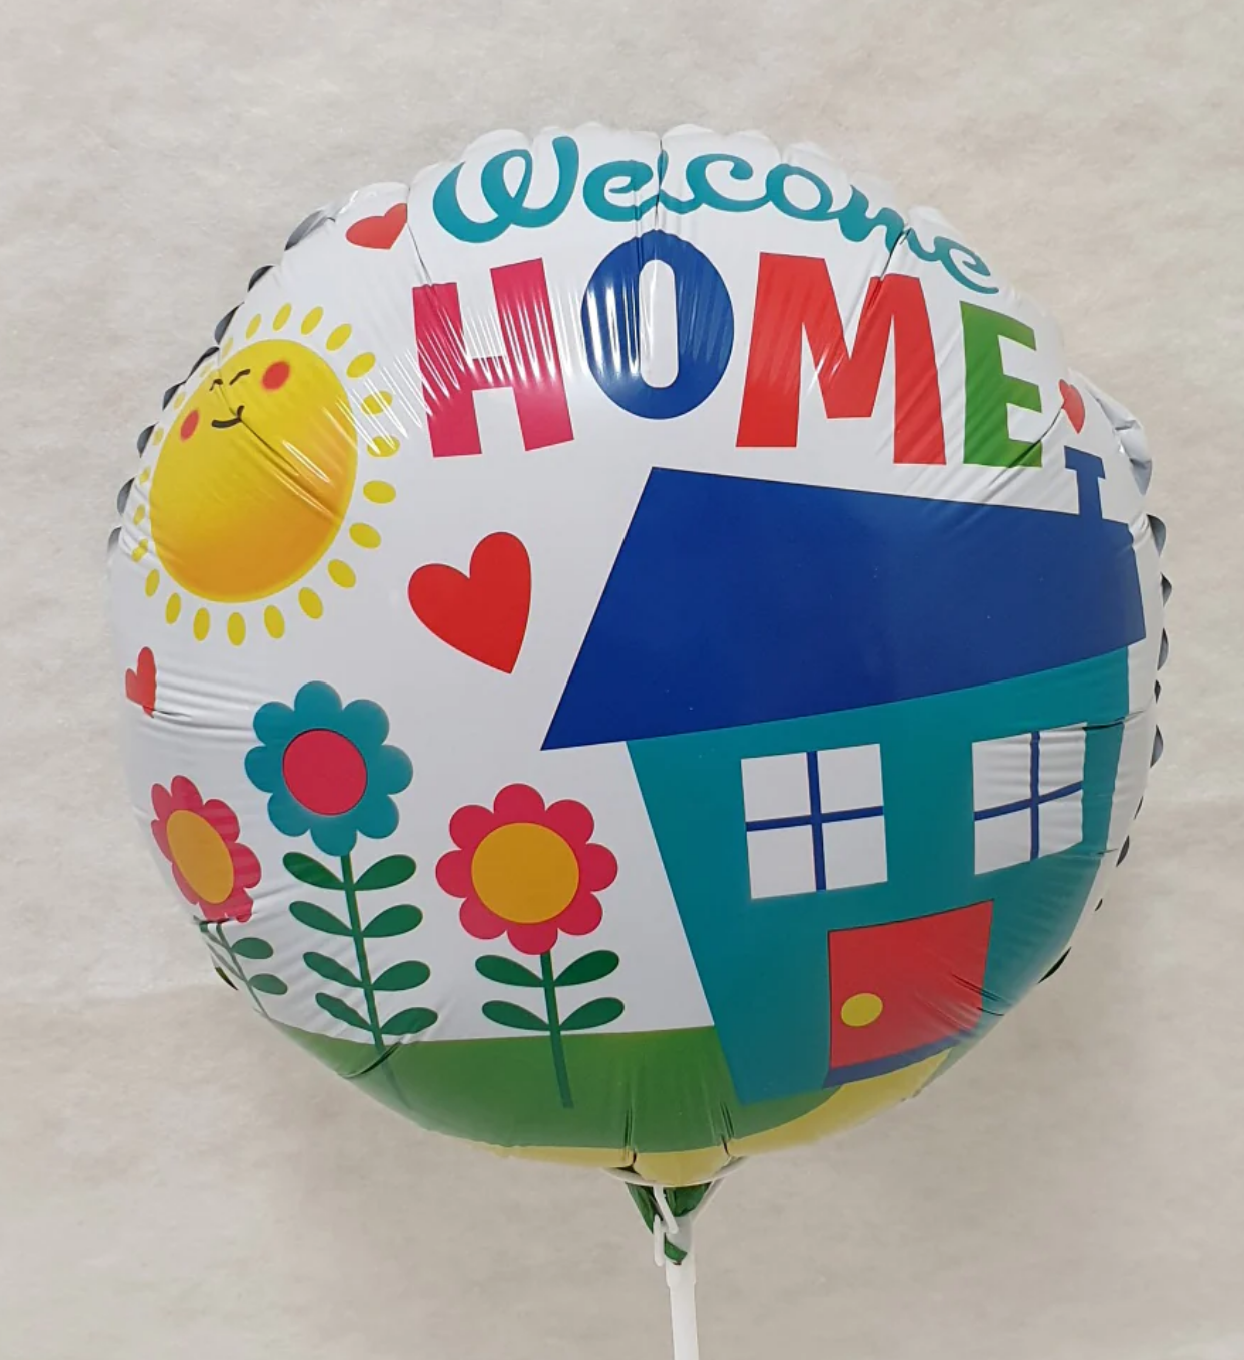 Welcome Home Foil Balloon (18 inch)